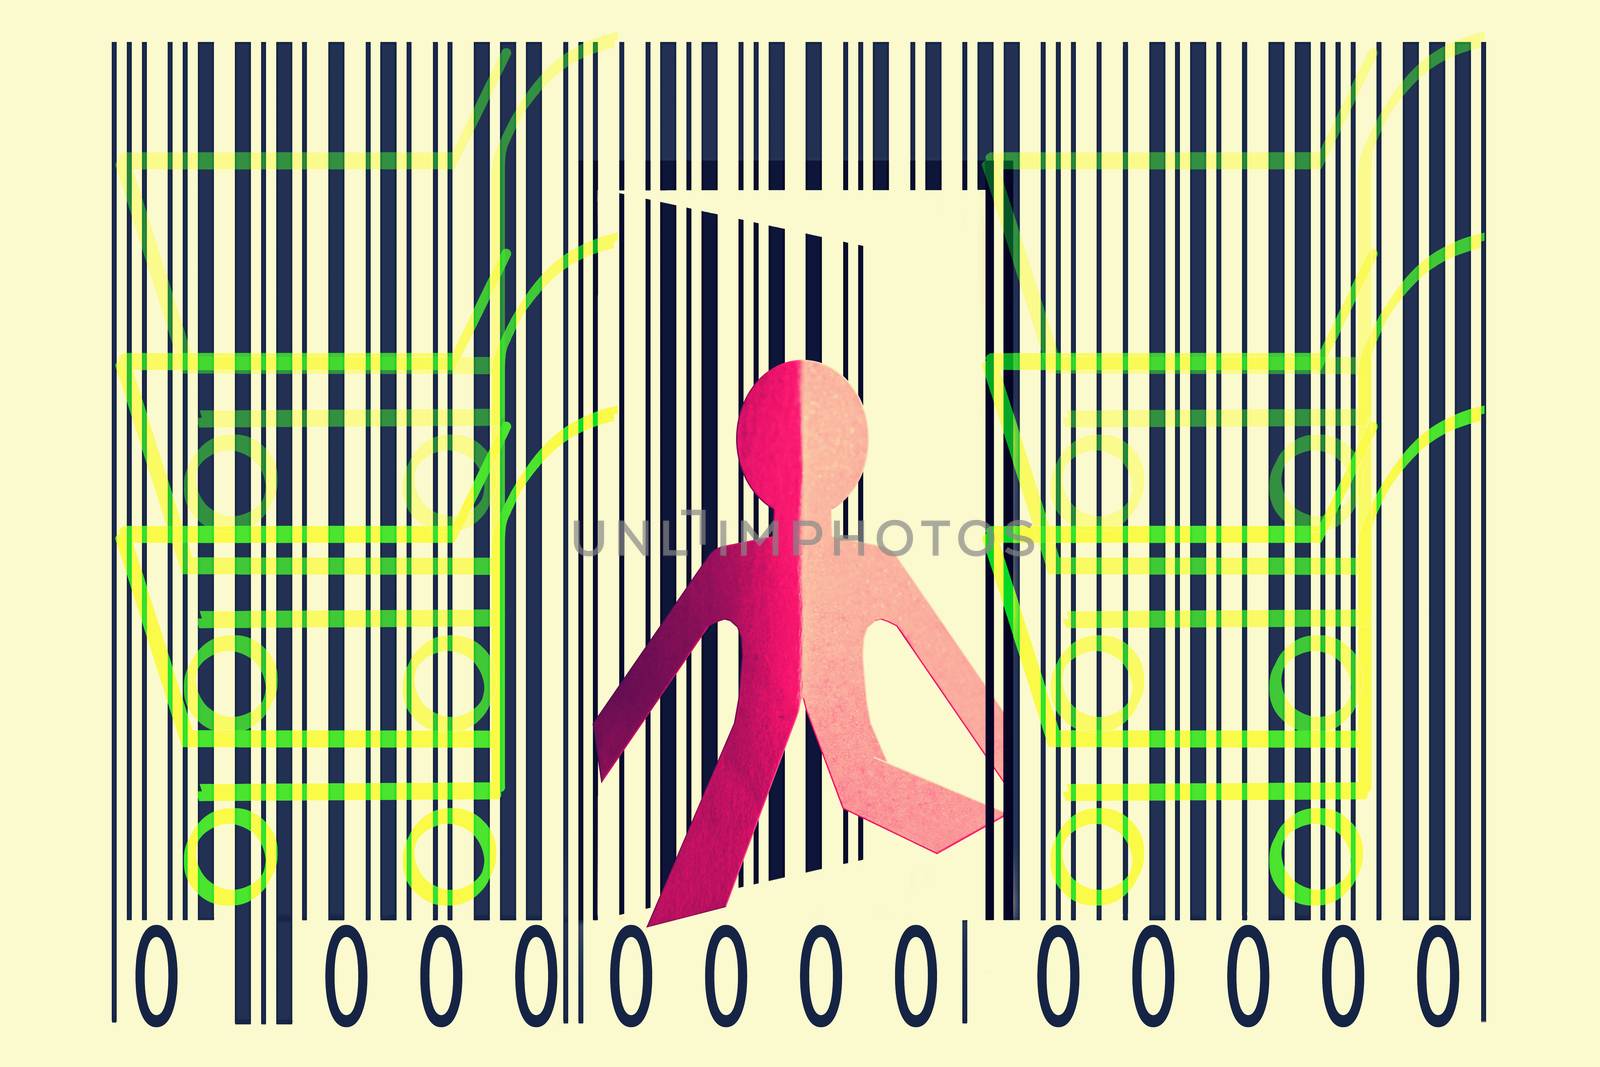 Paperman coming out of a bar code with shopping cart symbol